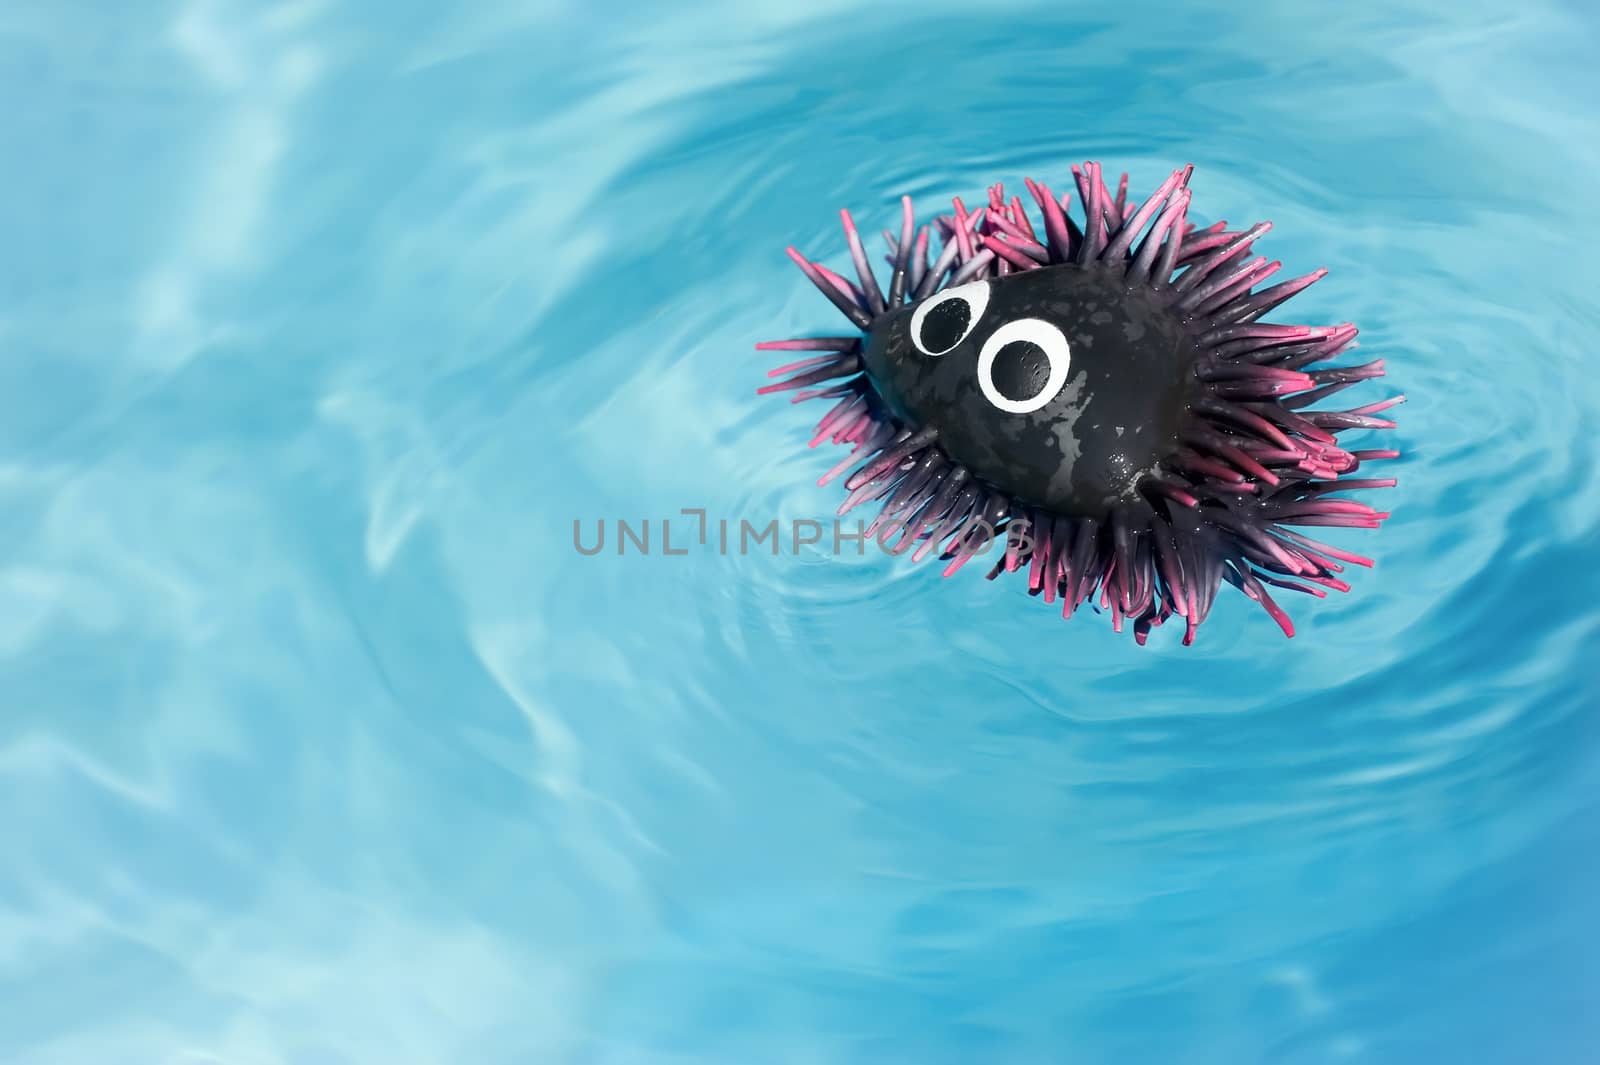 rubber sea urchin toy floating in water